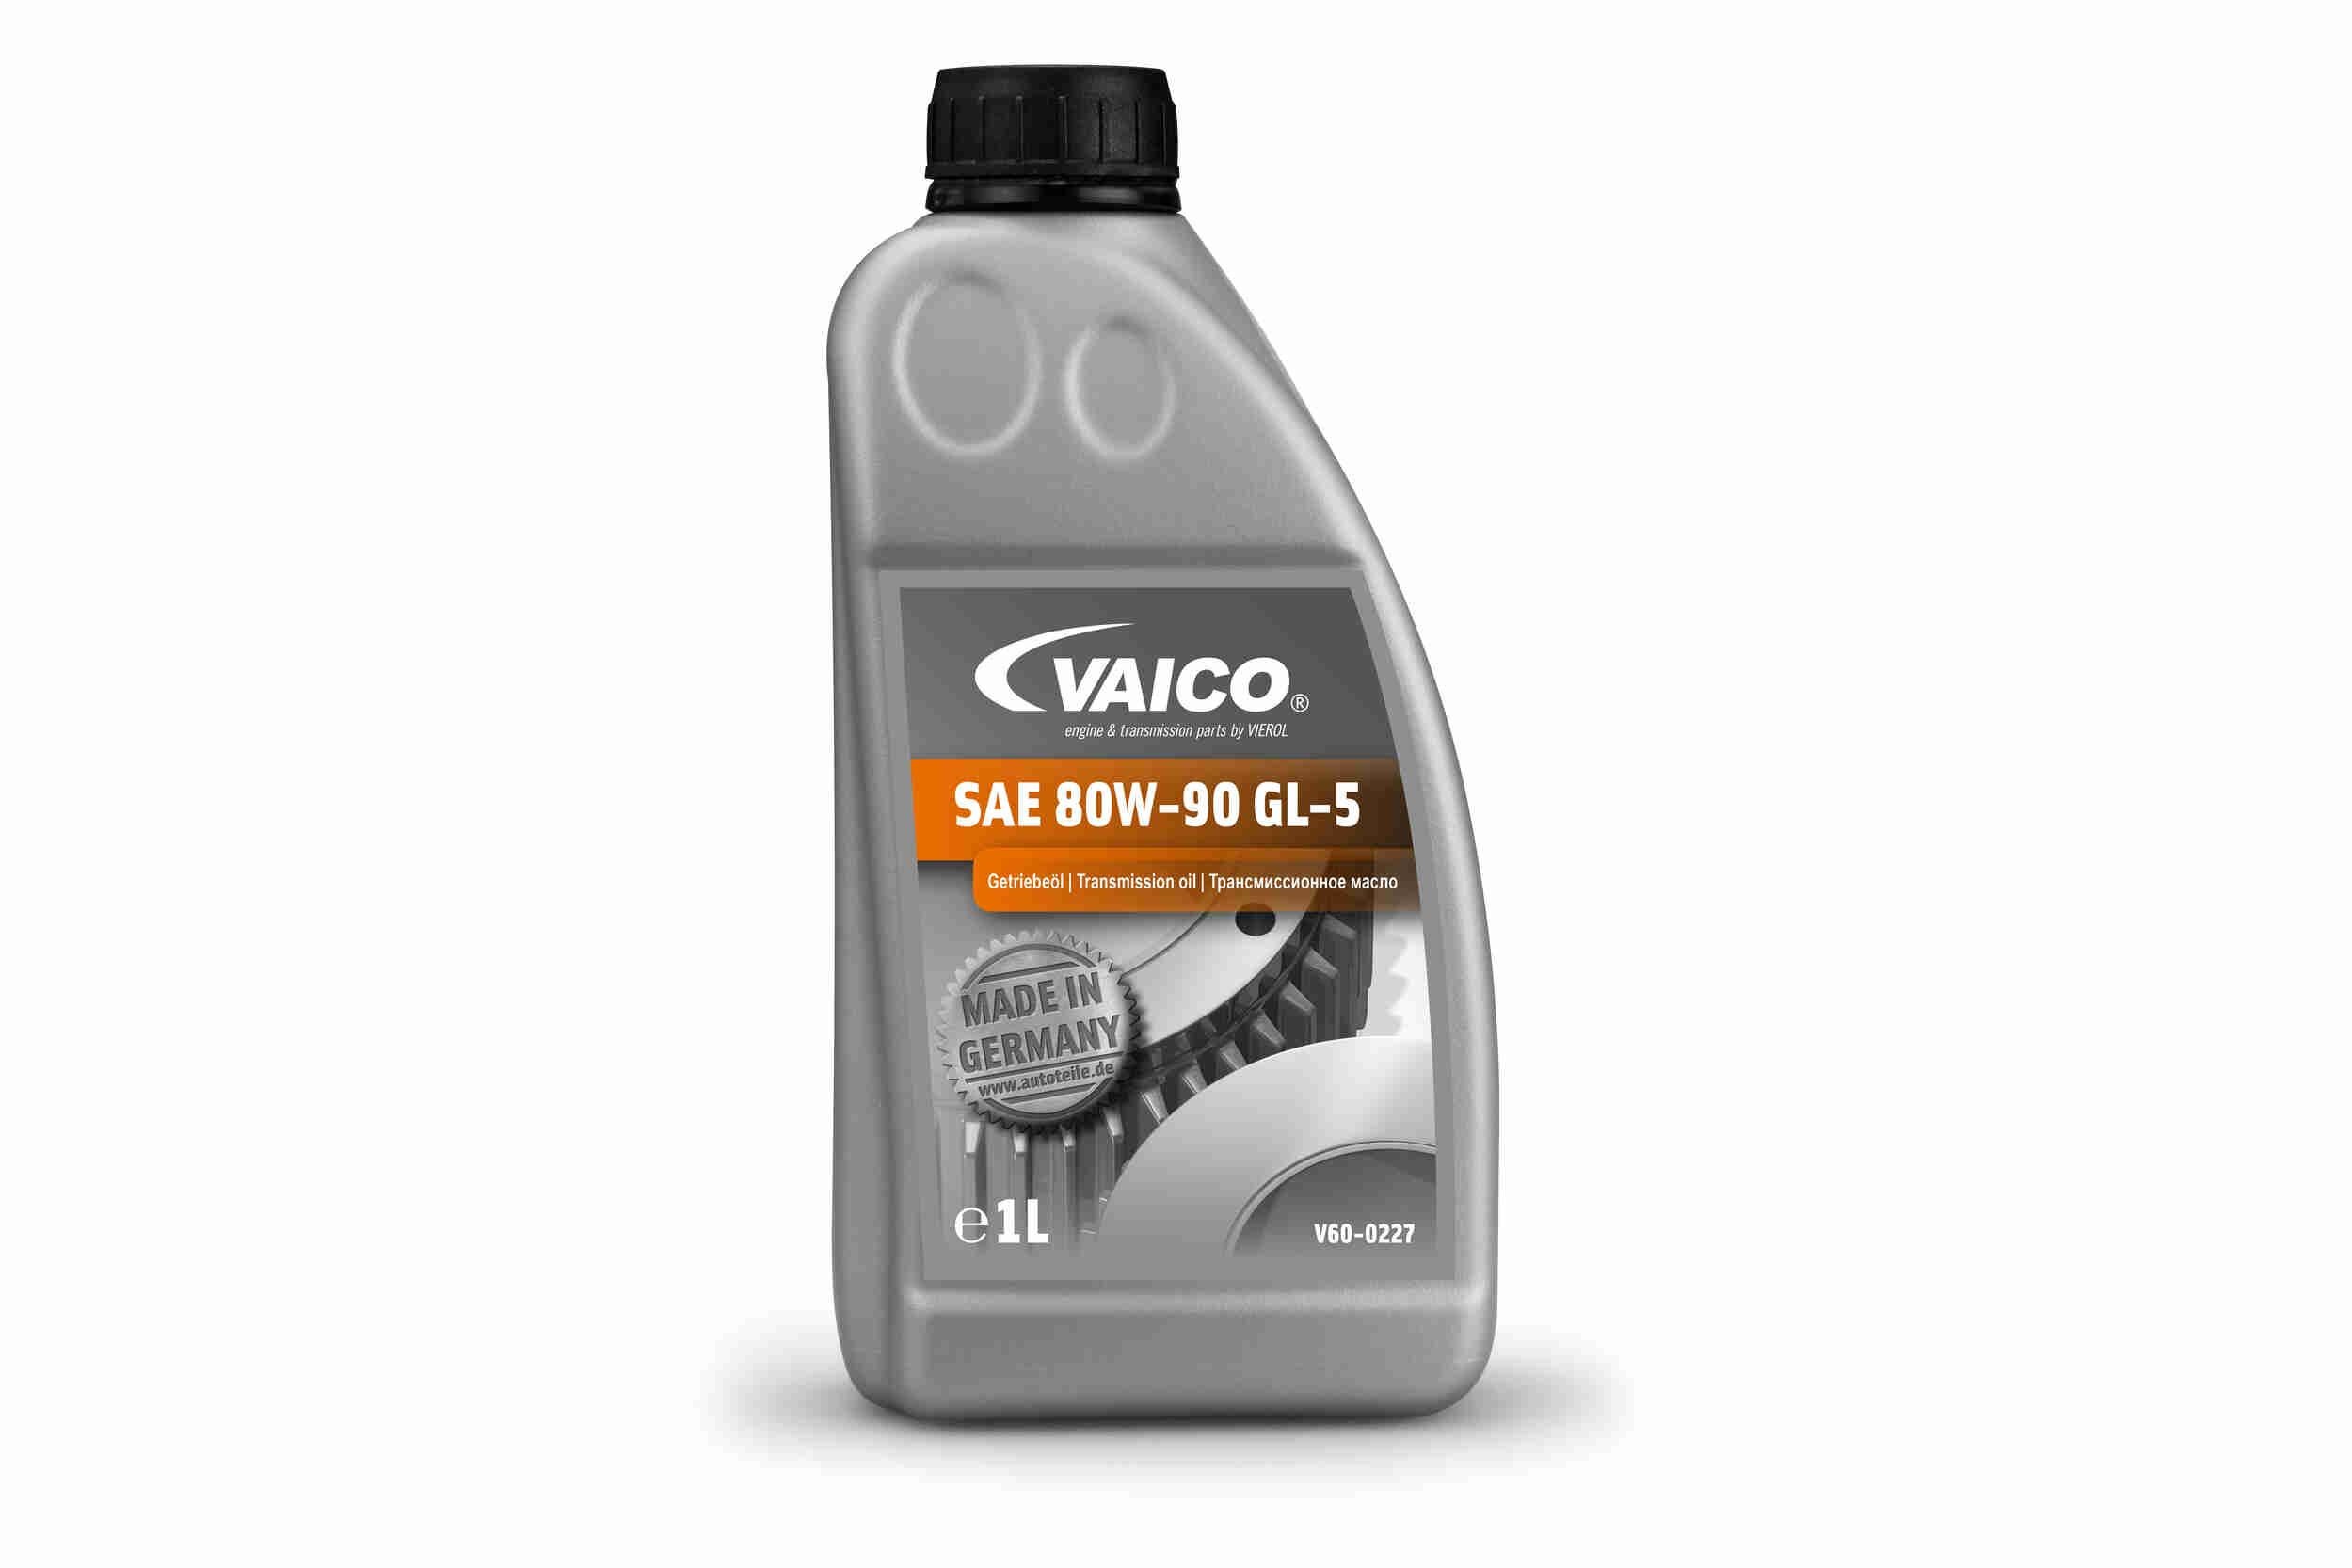 VAICO V60-0227 Manual Transmission Oil Capacity: 1l, 80W-90, Q+, original equipment manufacturer quality MADE IN GERMANY